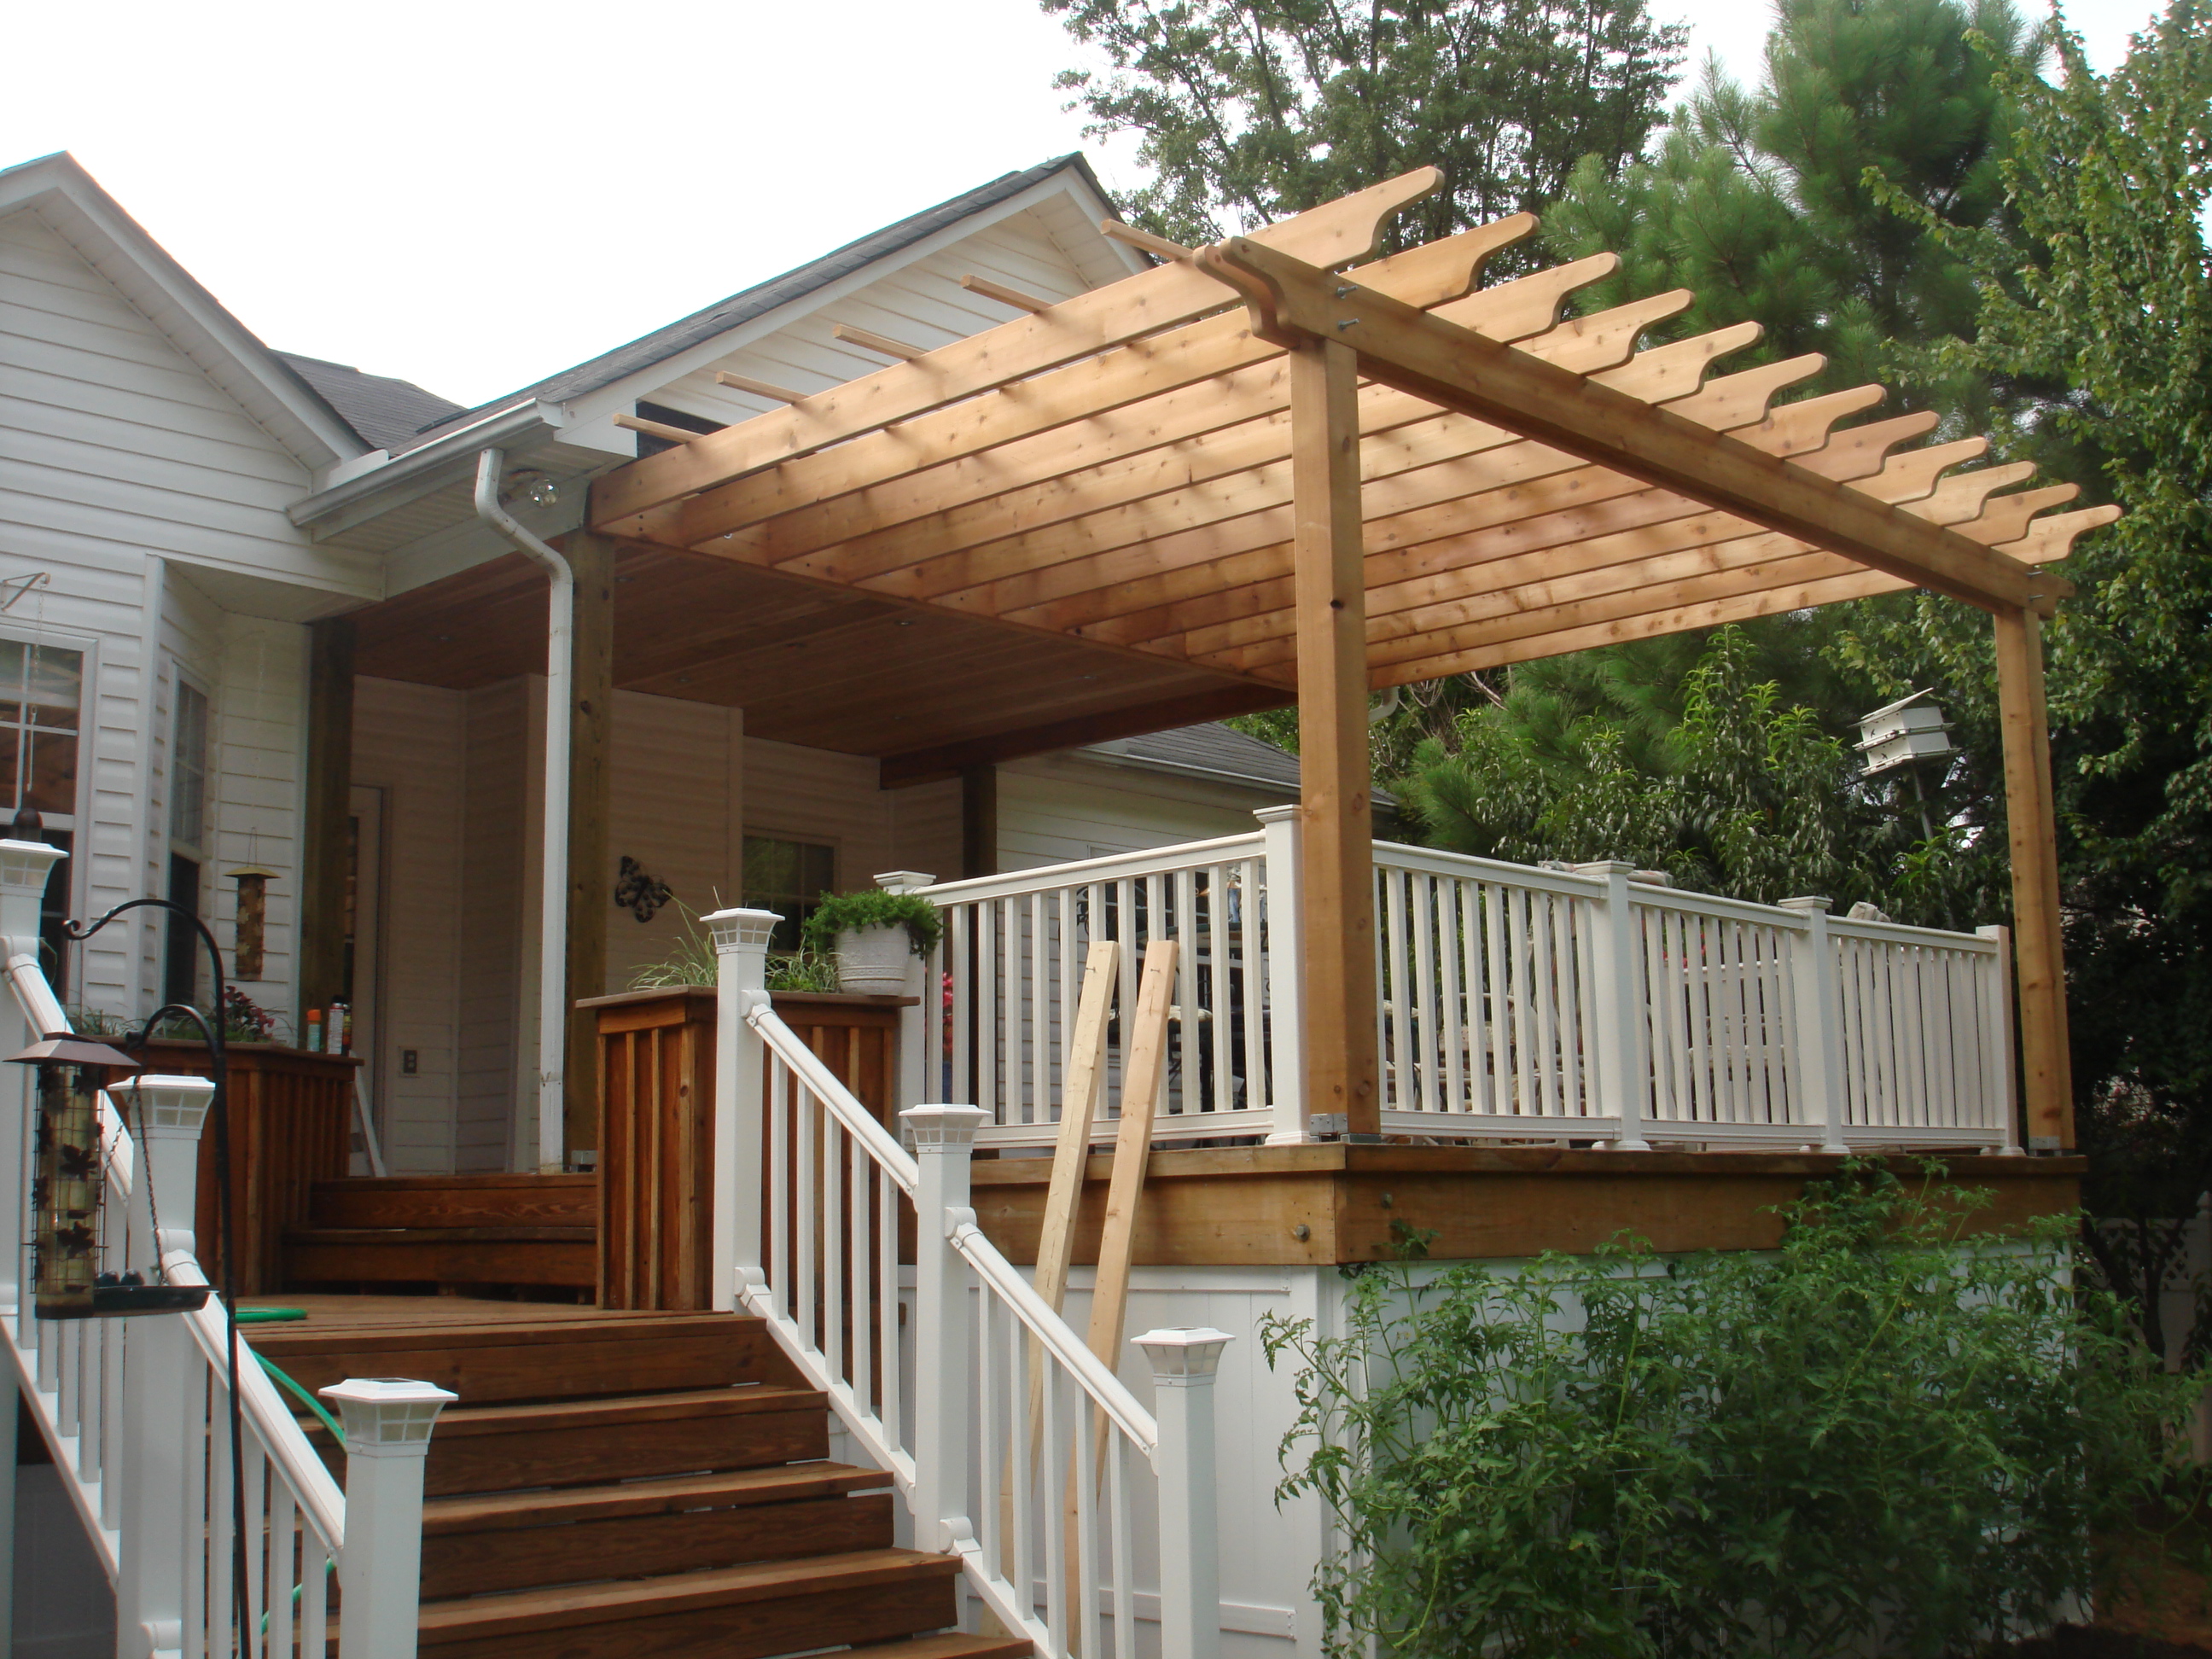 Pergola and Porch | Living the Good Life in Gaston County!